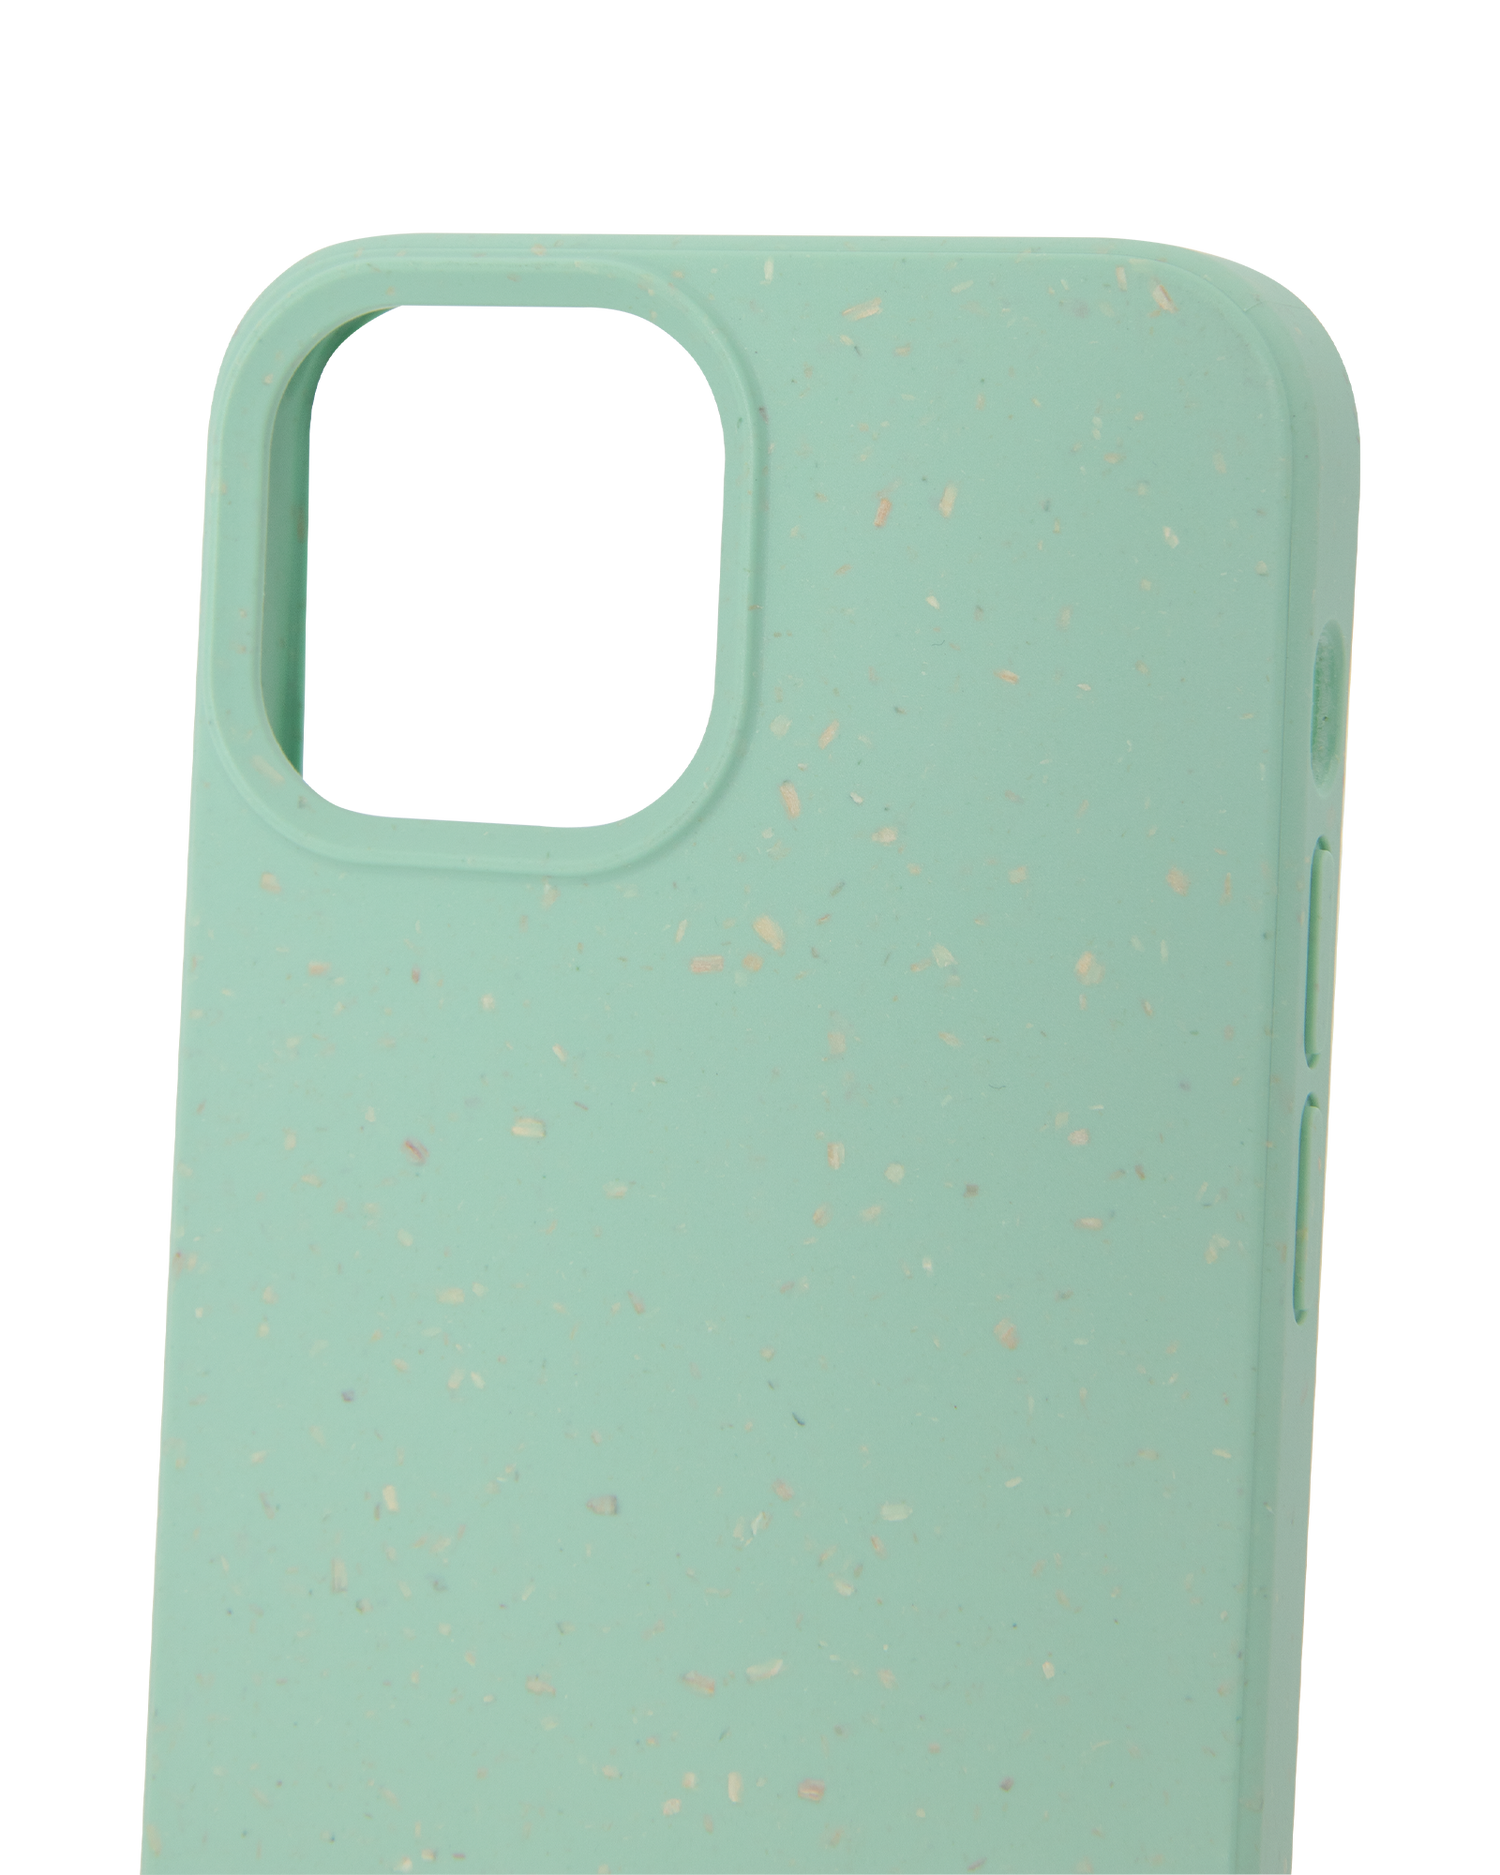 Light Green Eco-Friendly Phone Case for Apple iPhone 12 mini: Details outside